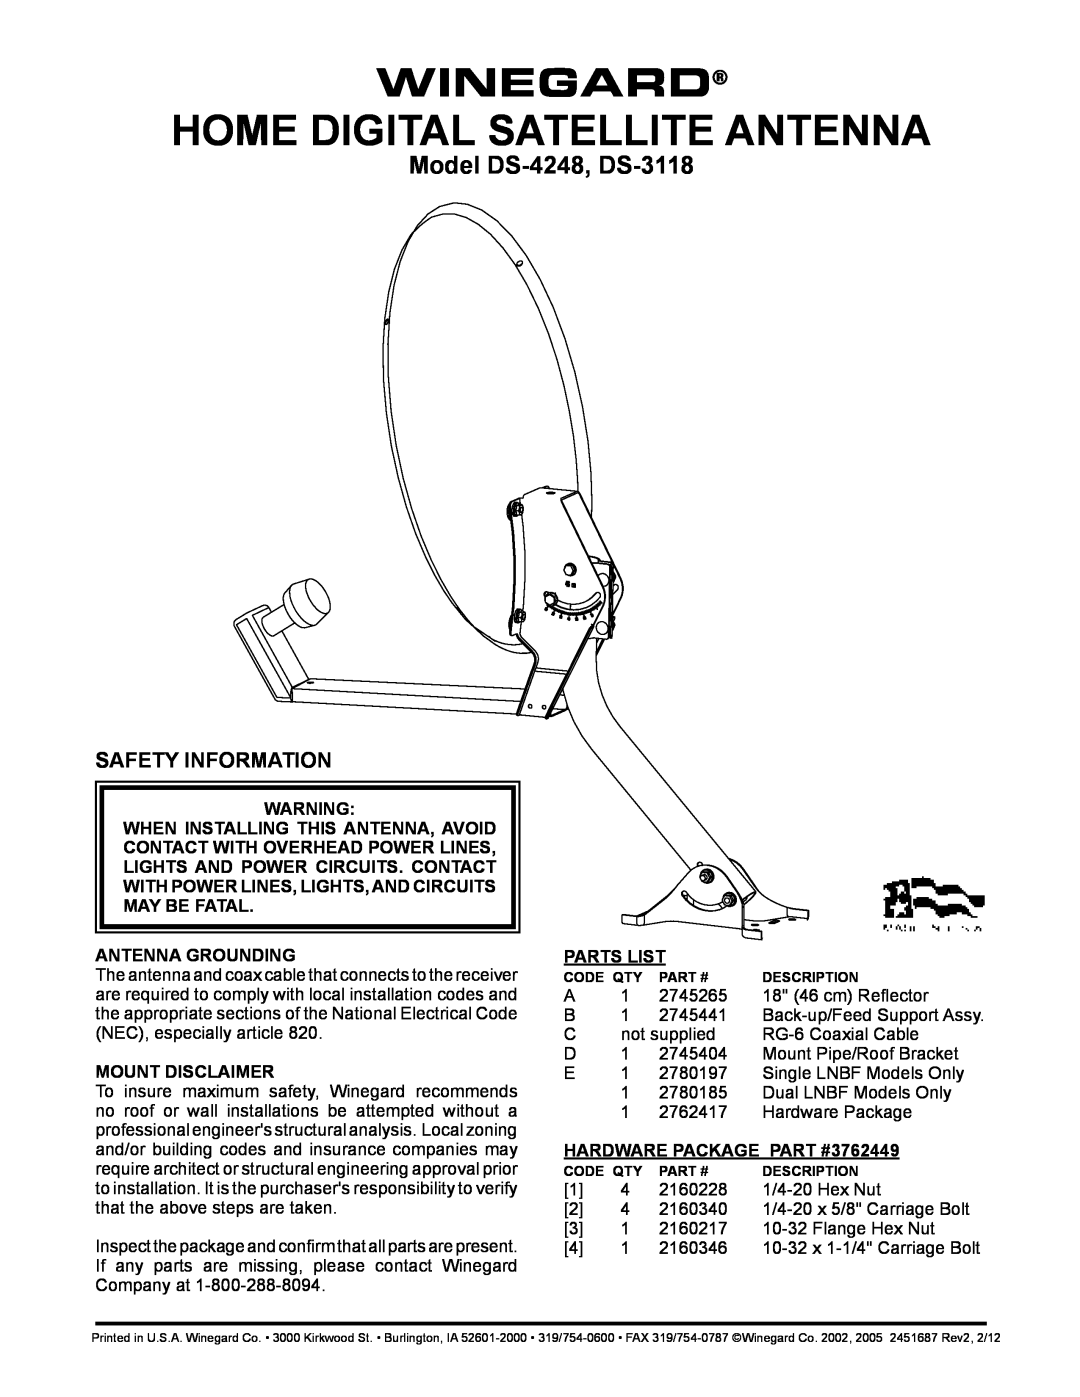 Winegard manual Safety Information, Antenna Grounding, Mount Disclaimer, Parts List, Model DS-4248, DS-3118 